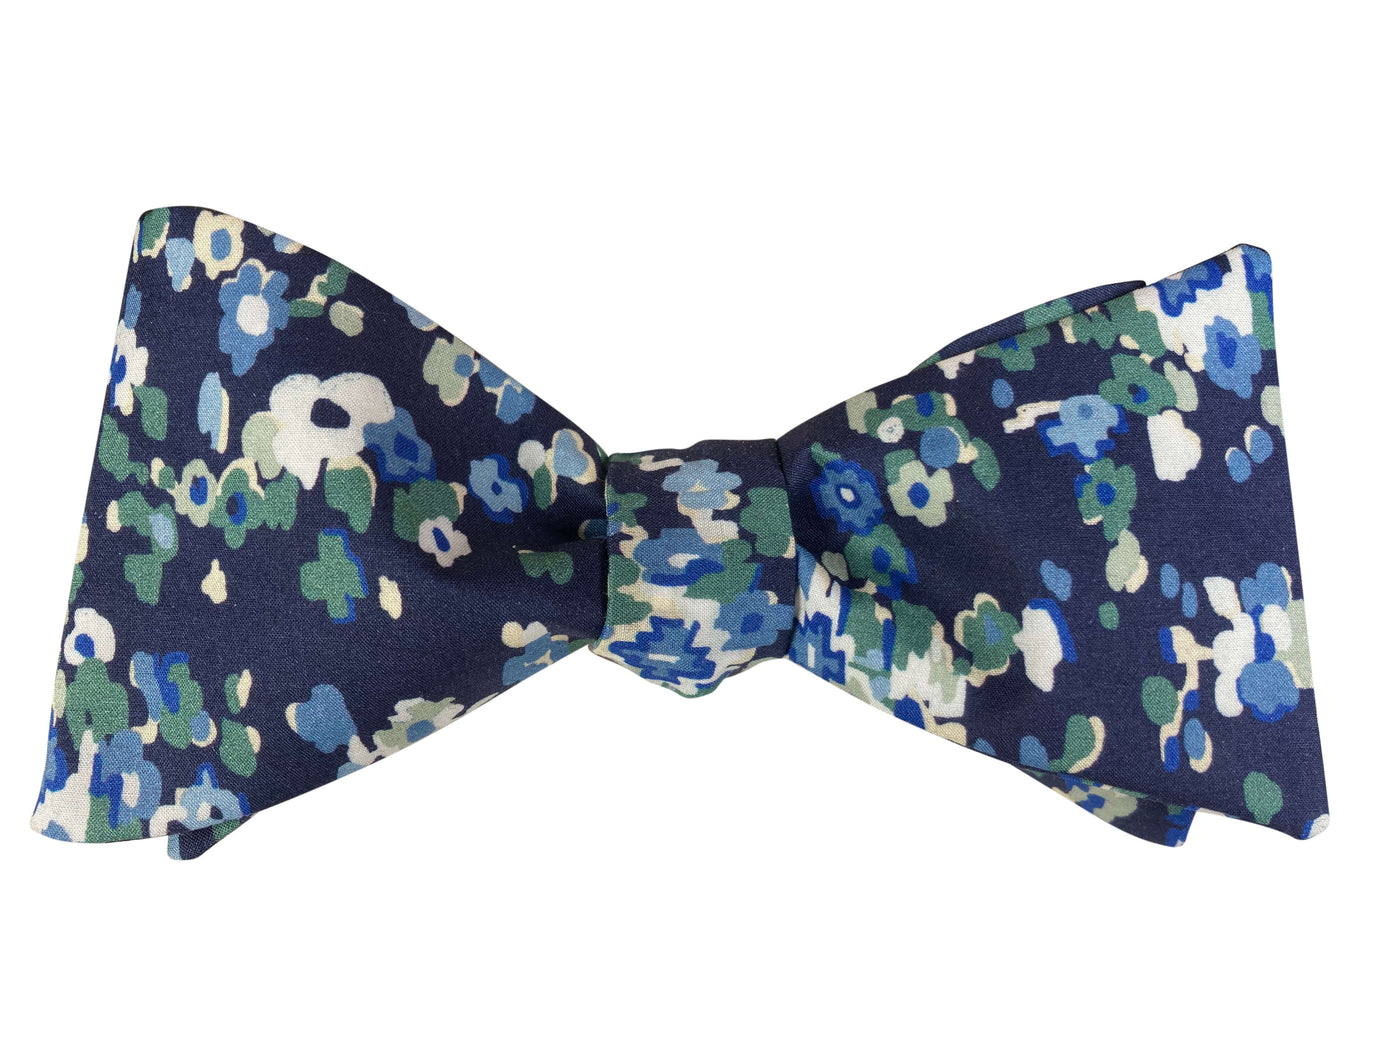 Floral Bow Ties - Unique Handmade Floral Design Bow Ties